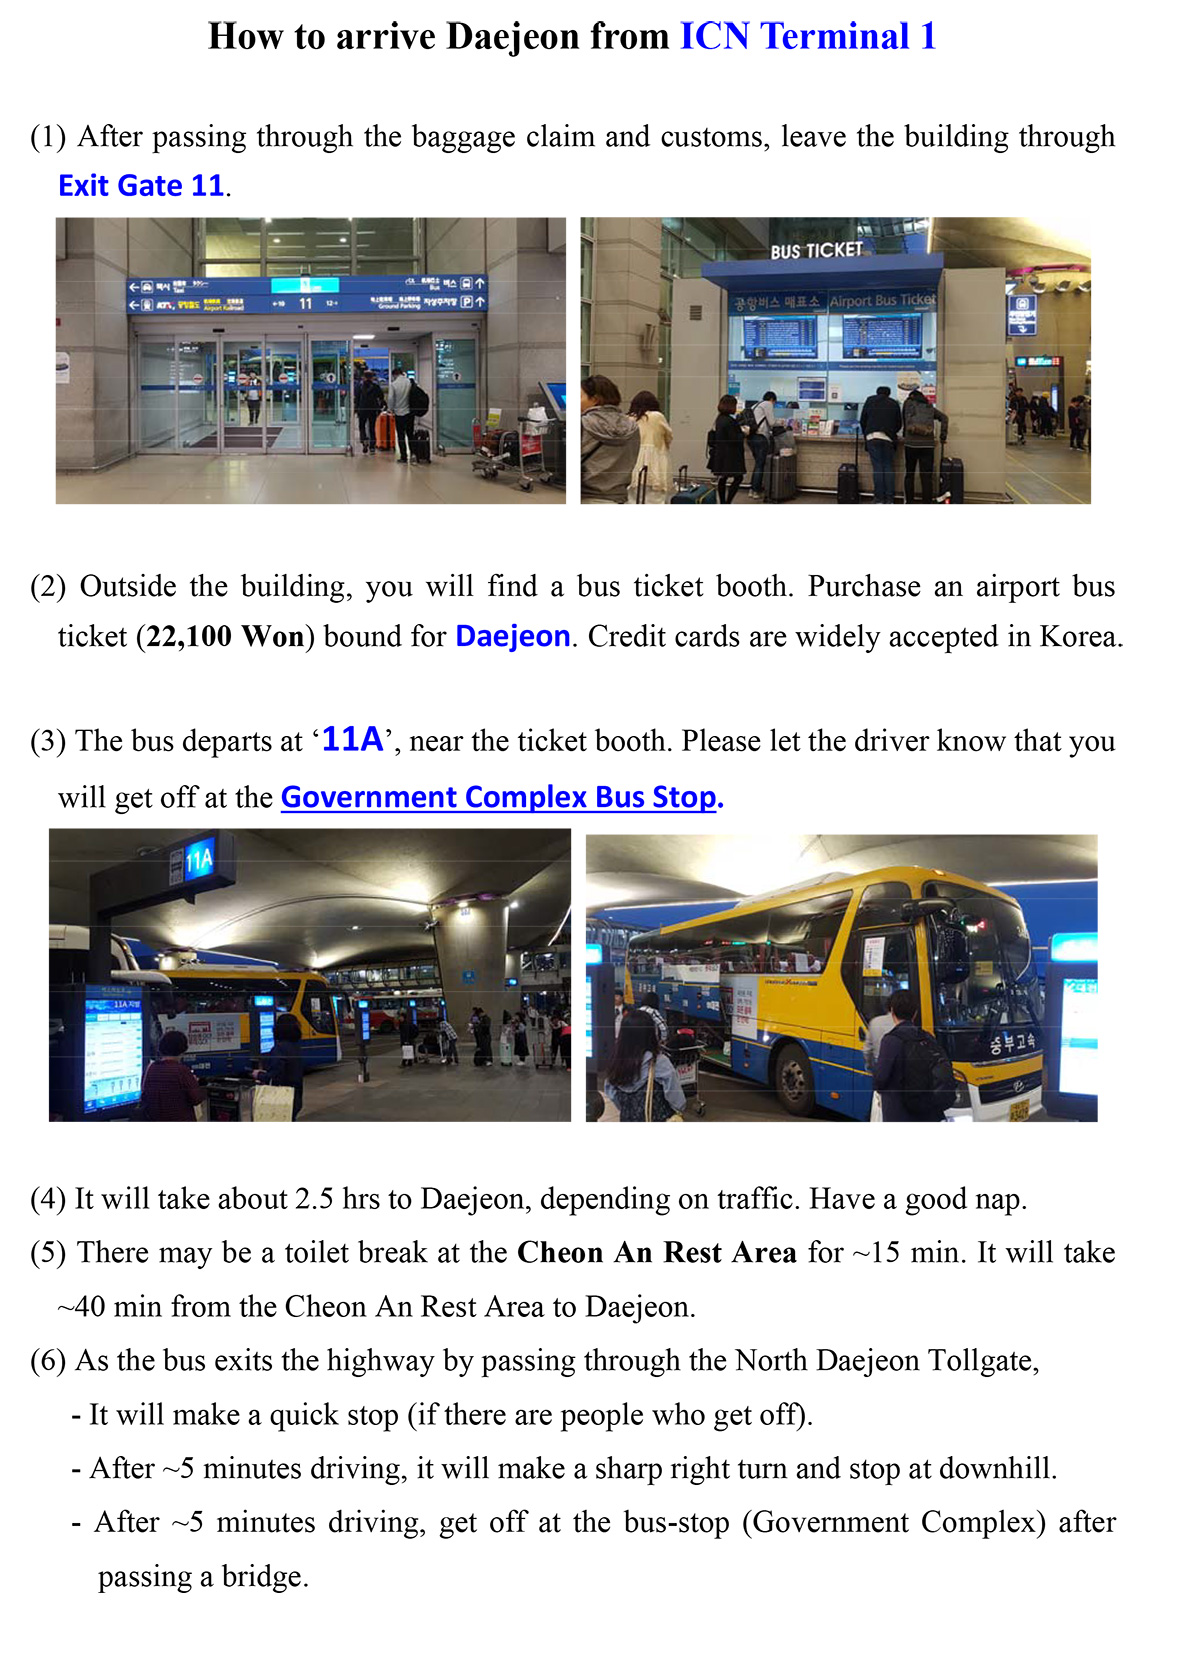 How to get to hotel ICC Daejeon 1